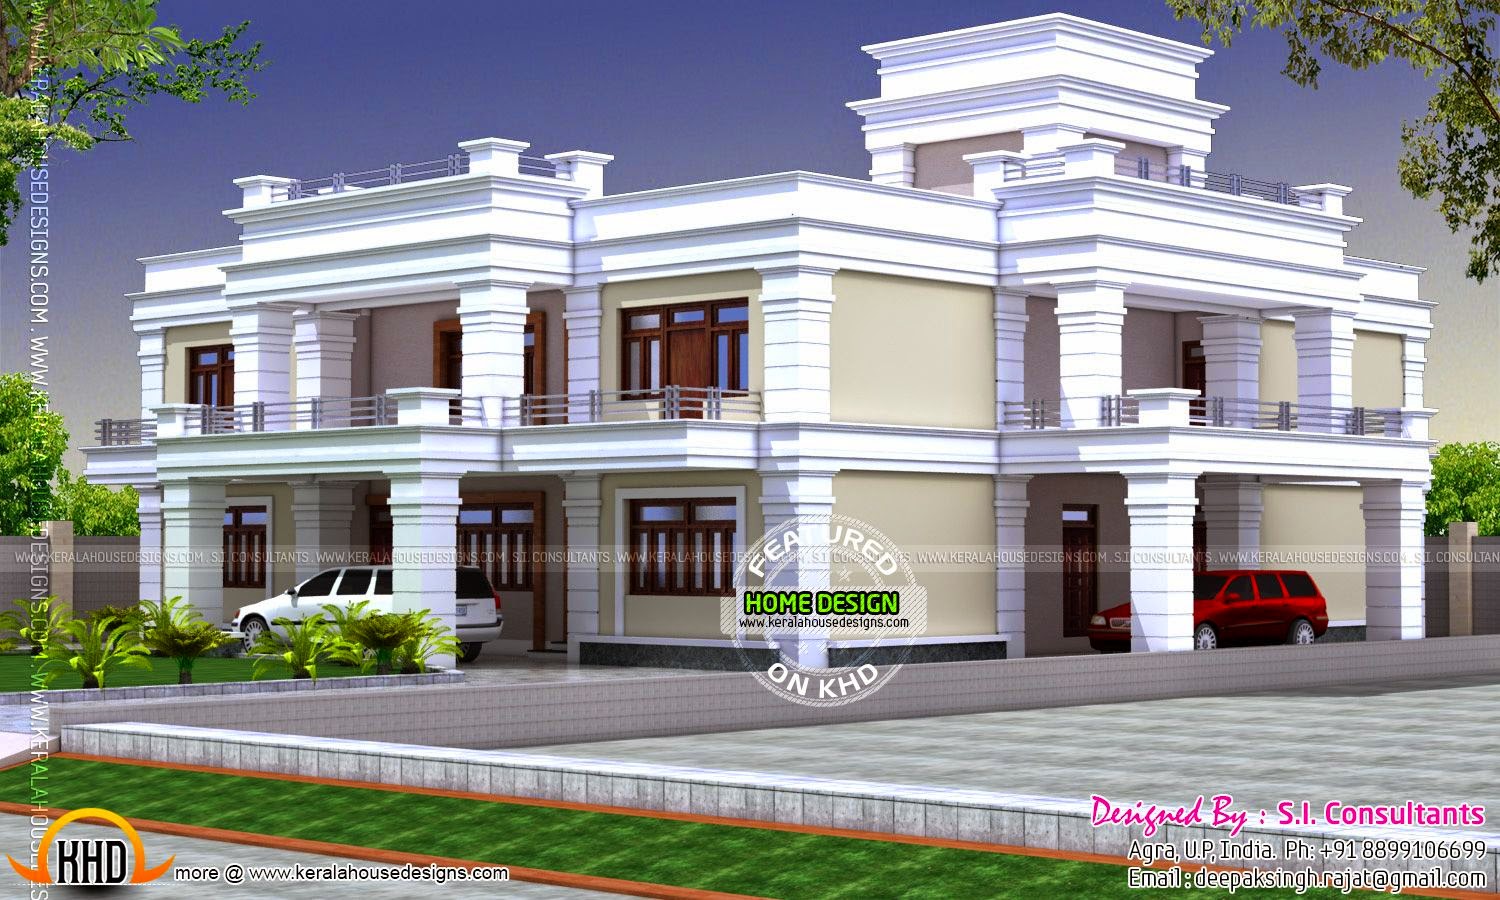 Decorative flat roof house - Kerala home design and floor plans - 8000